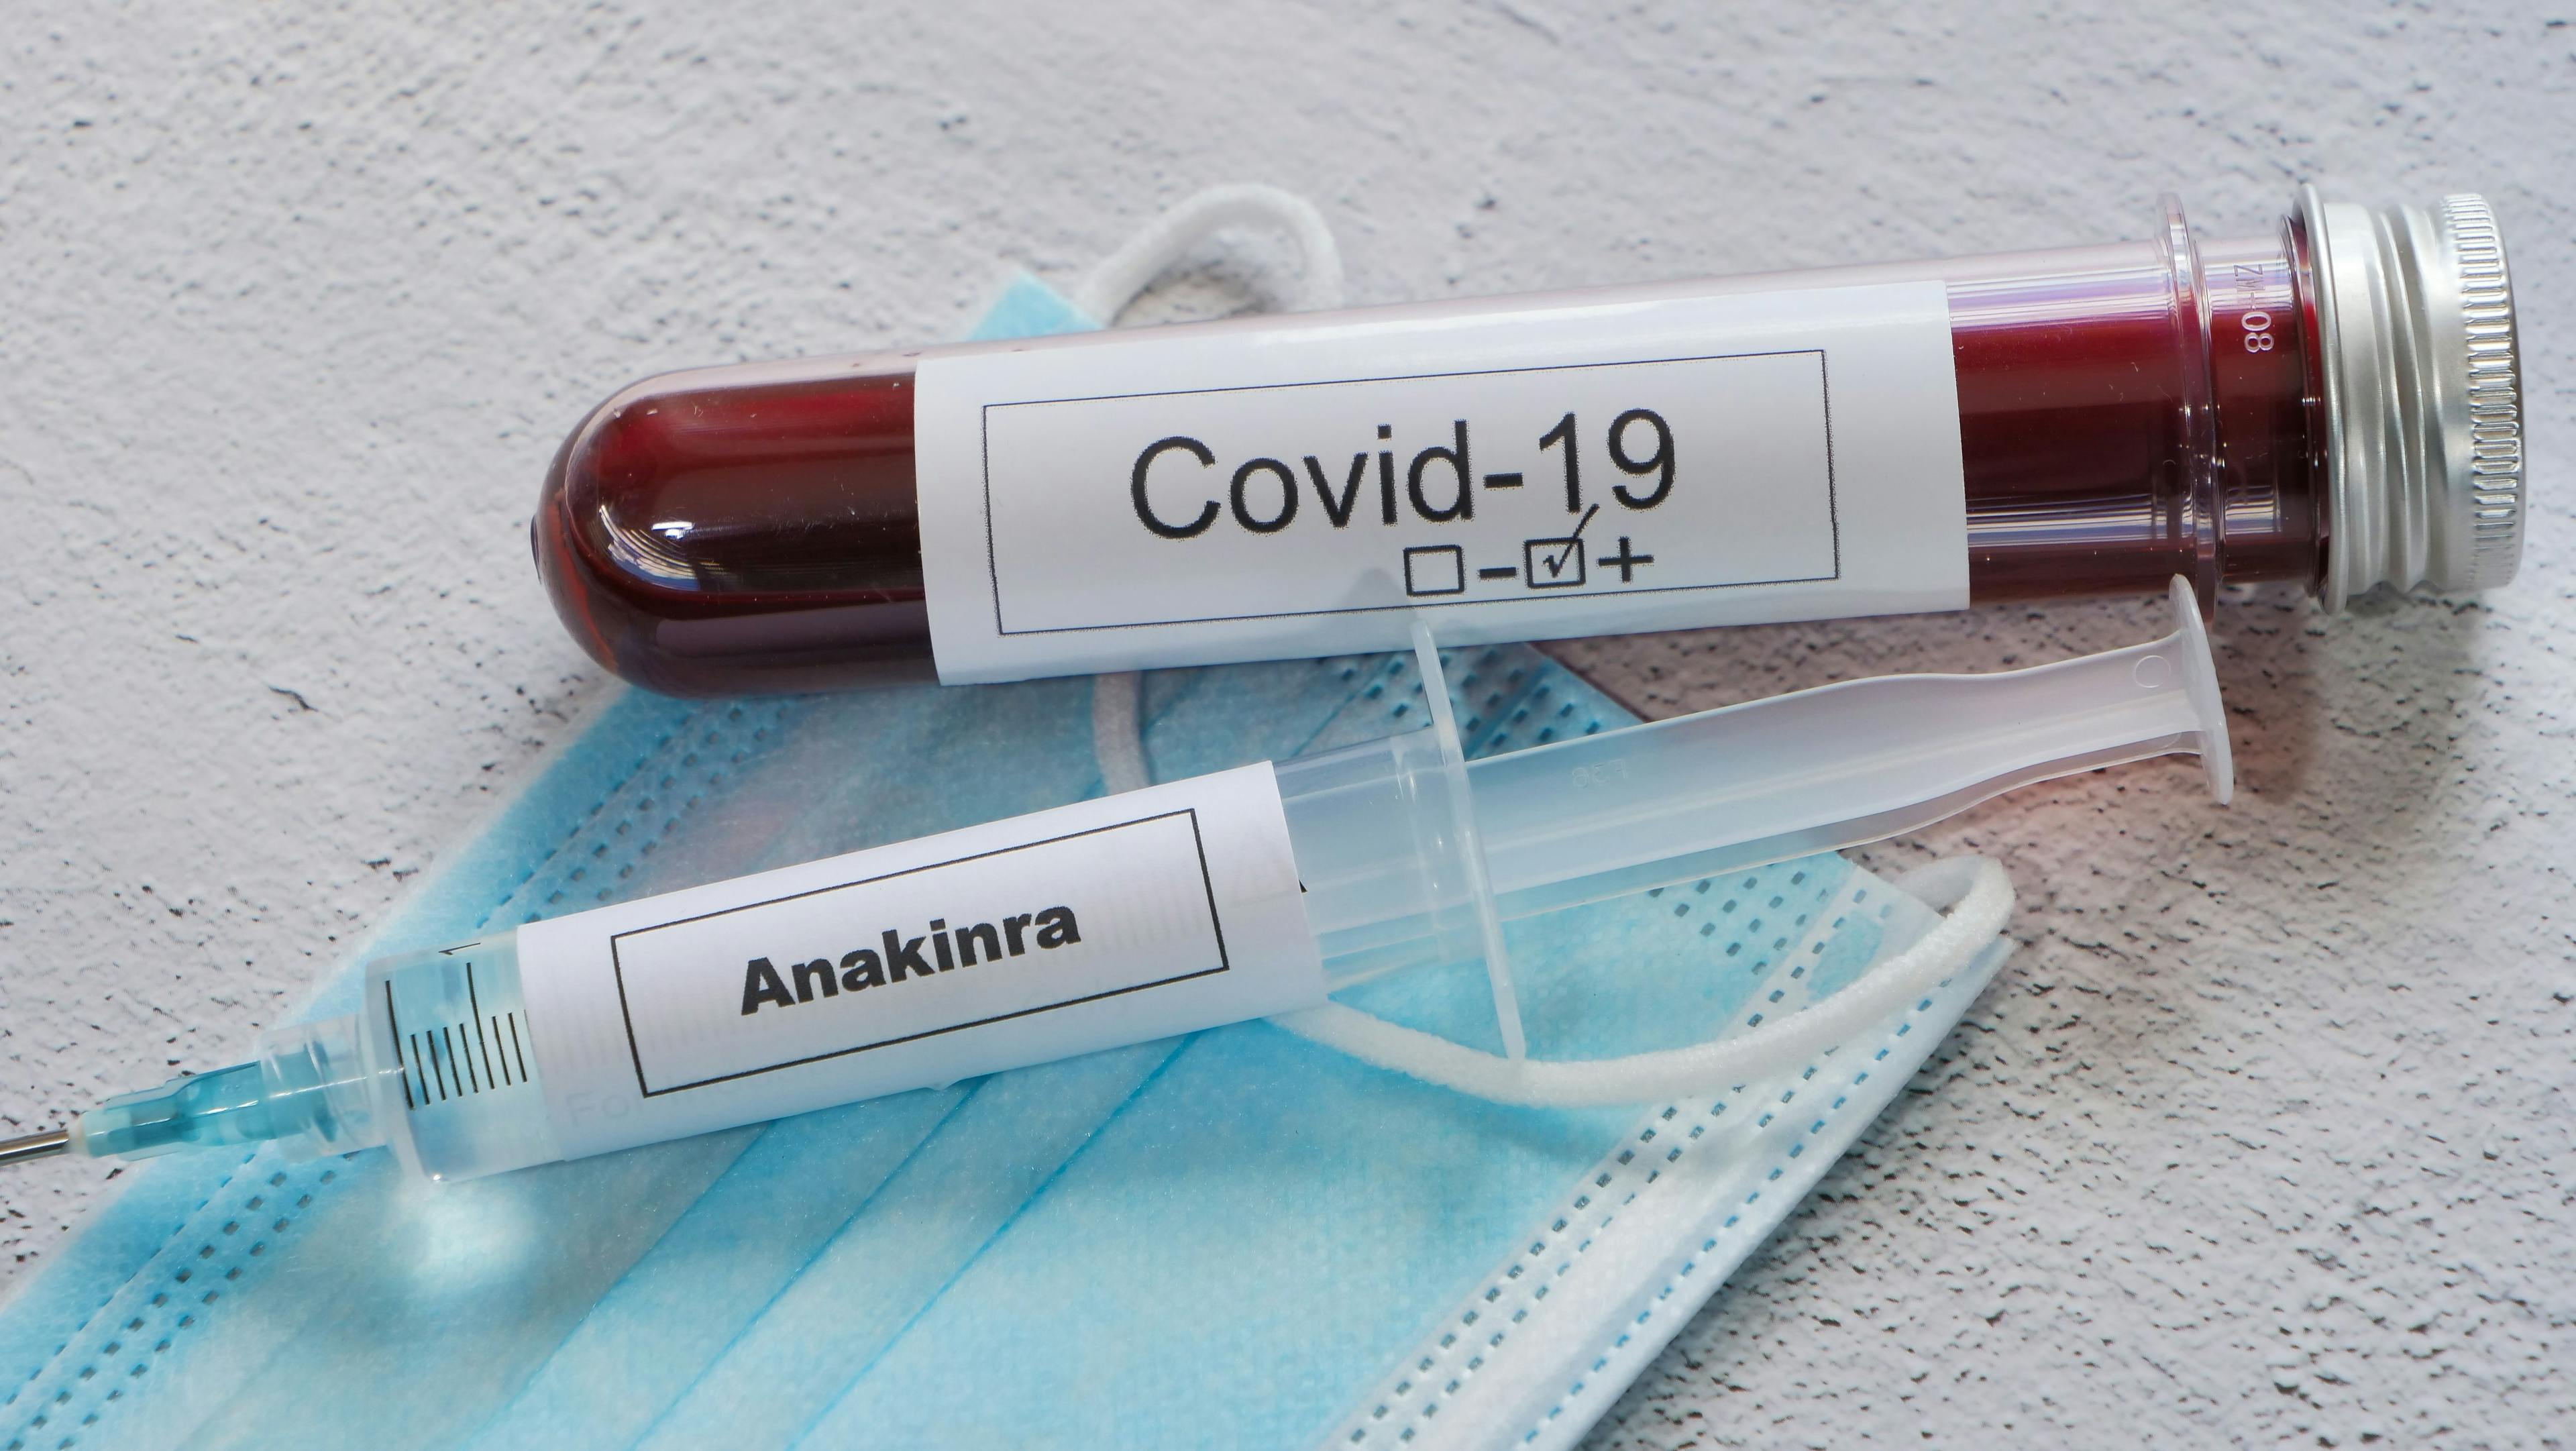 Can anakinra reduce inflammation and the need for mechanical ventilation in patients with severe COVID-19 pneumonia?